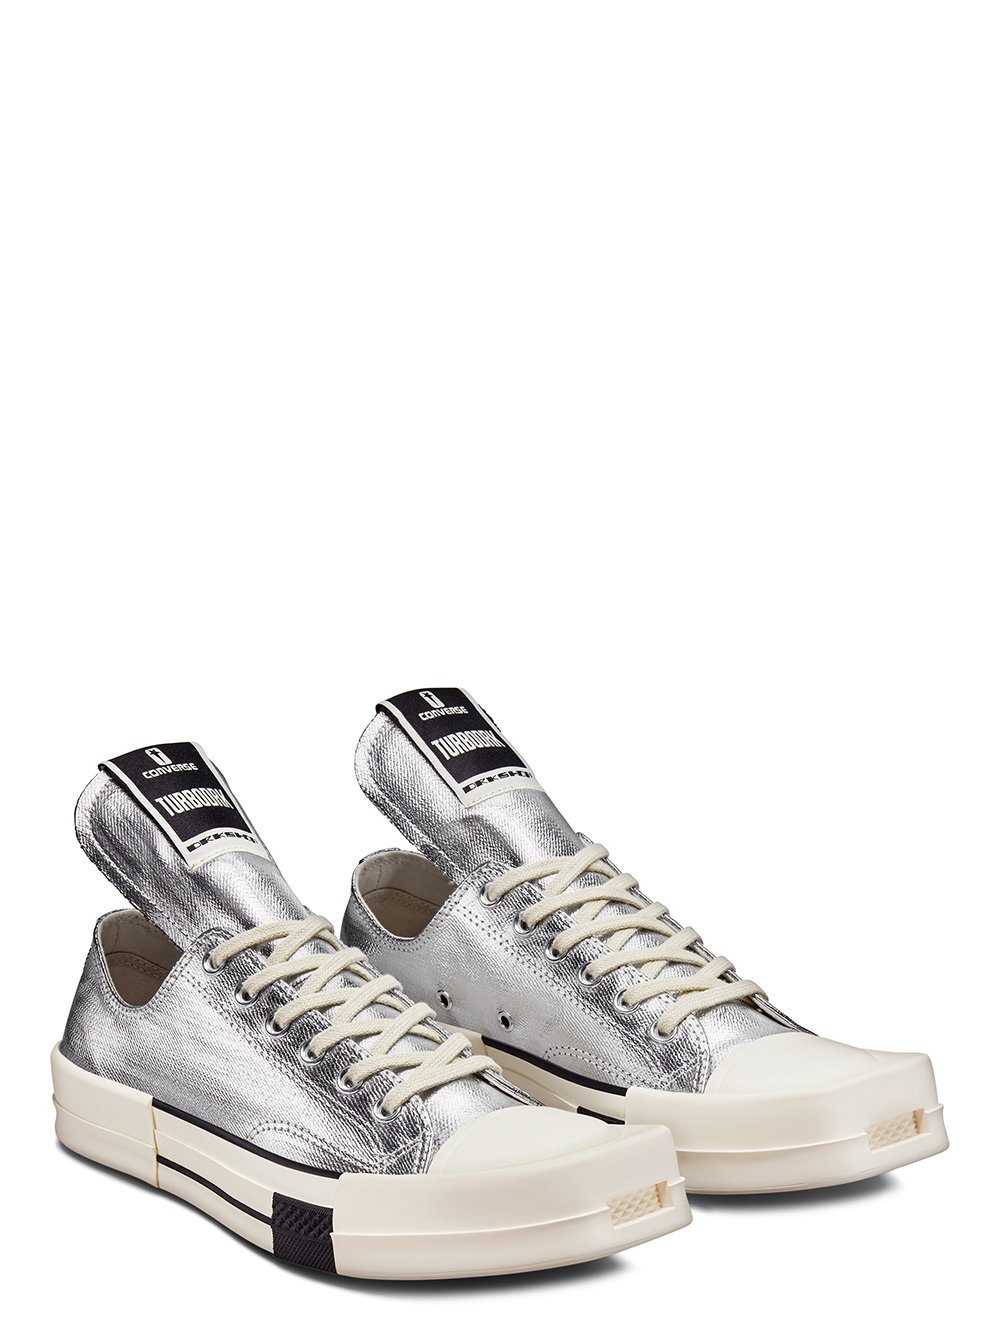 CONVERSE X DRKSHDW TURBODRK IN SILVER AND WHITE